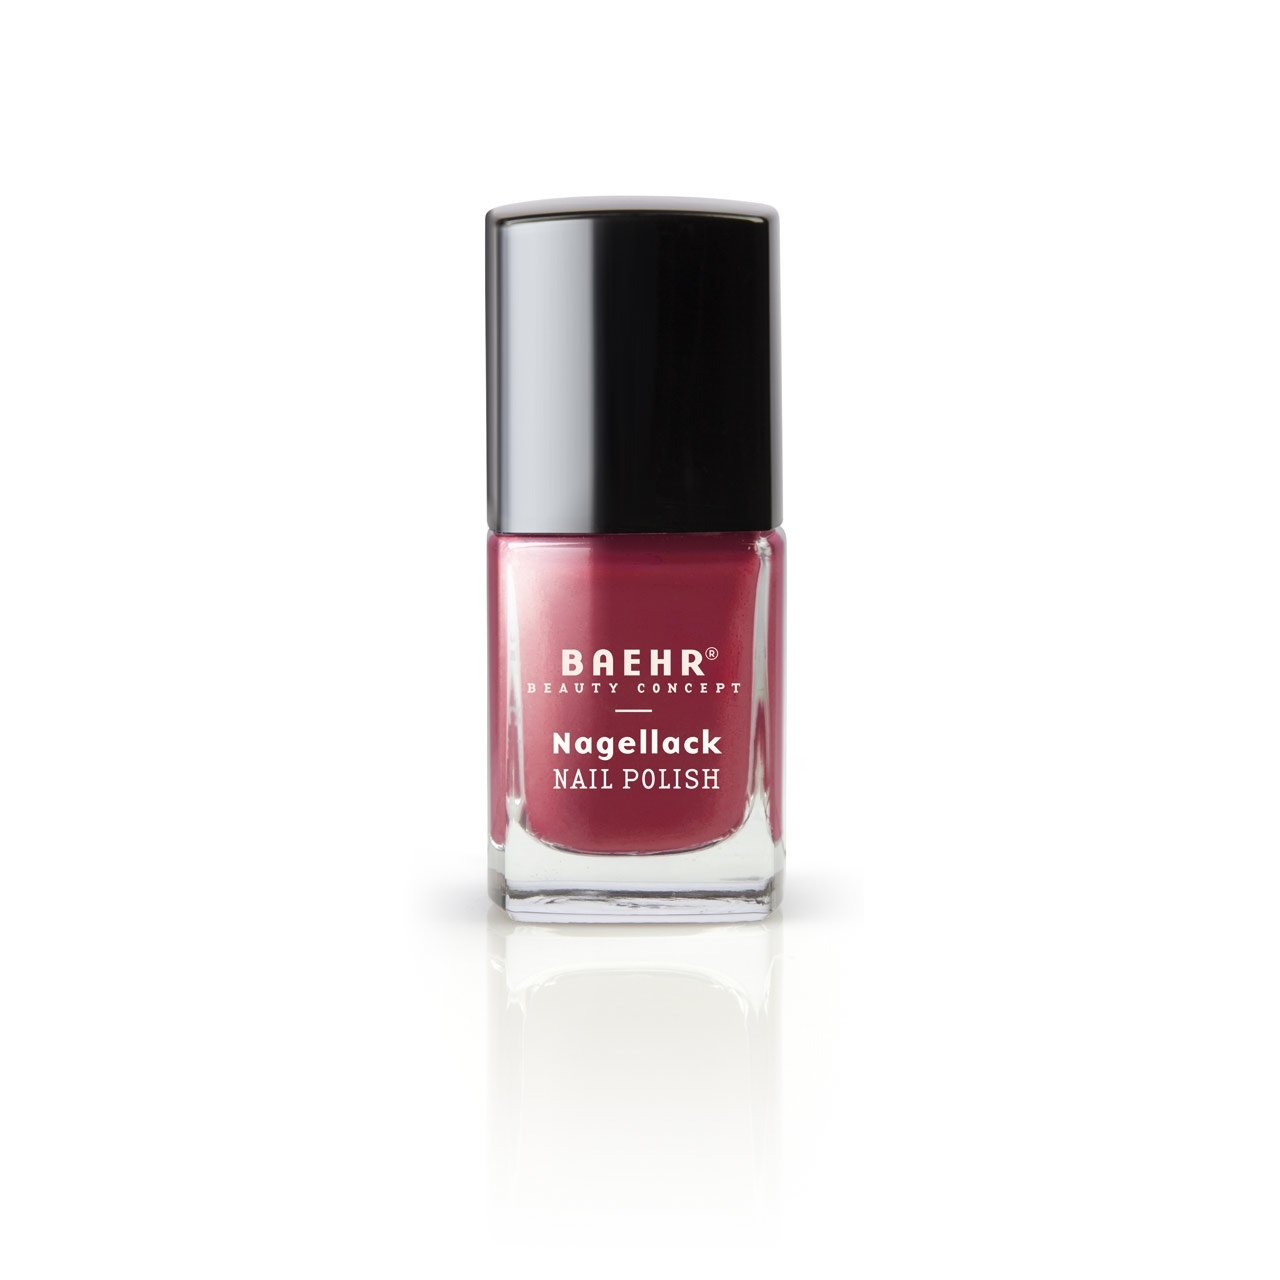 BAEHR BEAUTY CONCEPT - NAILS Nagellack love reflection 11 ml